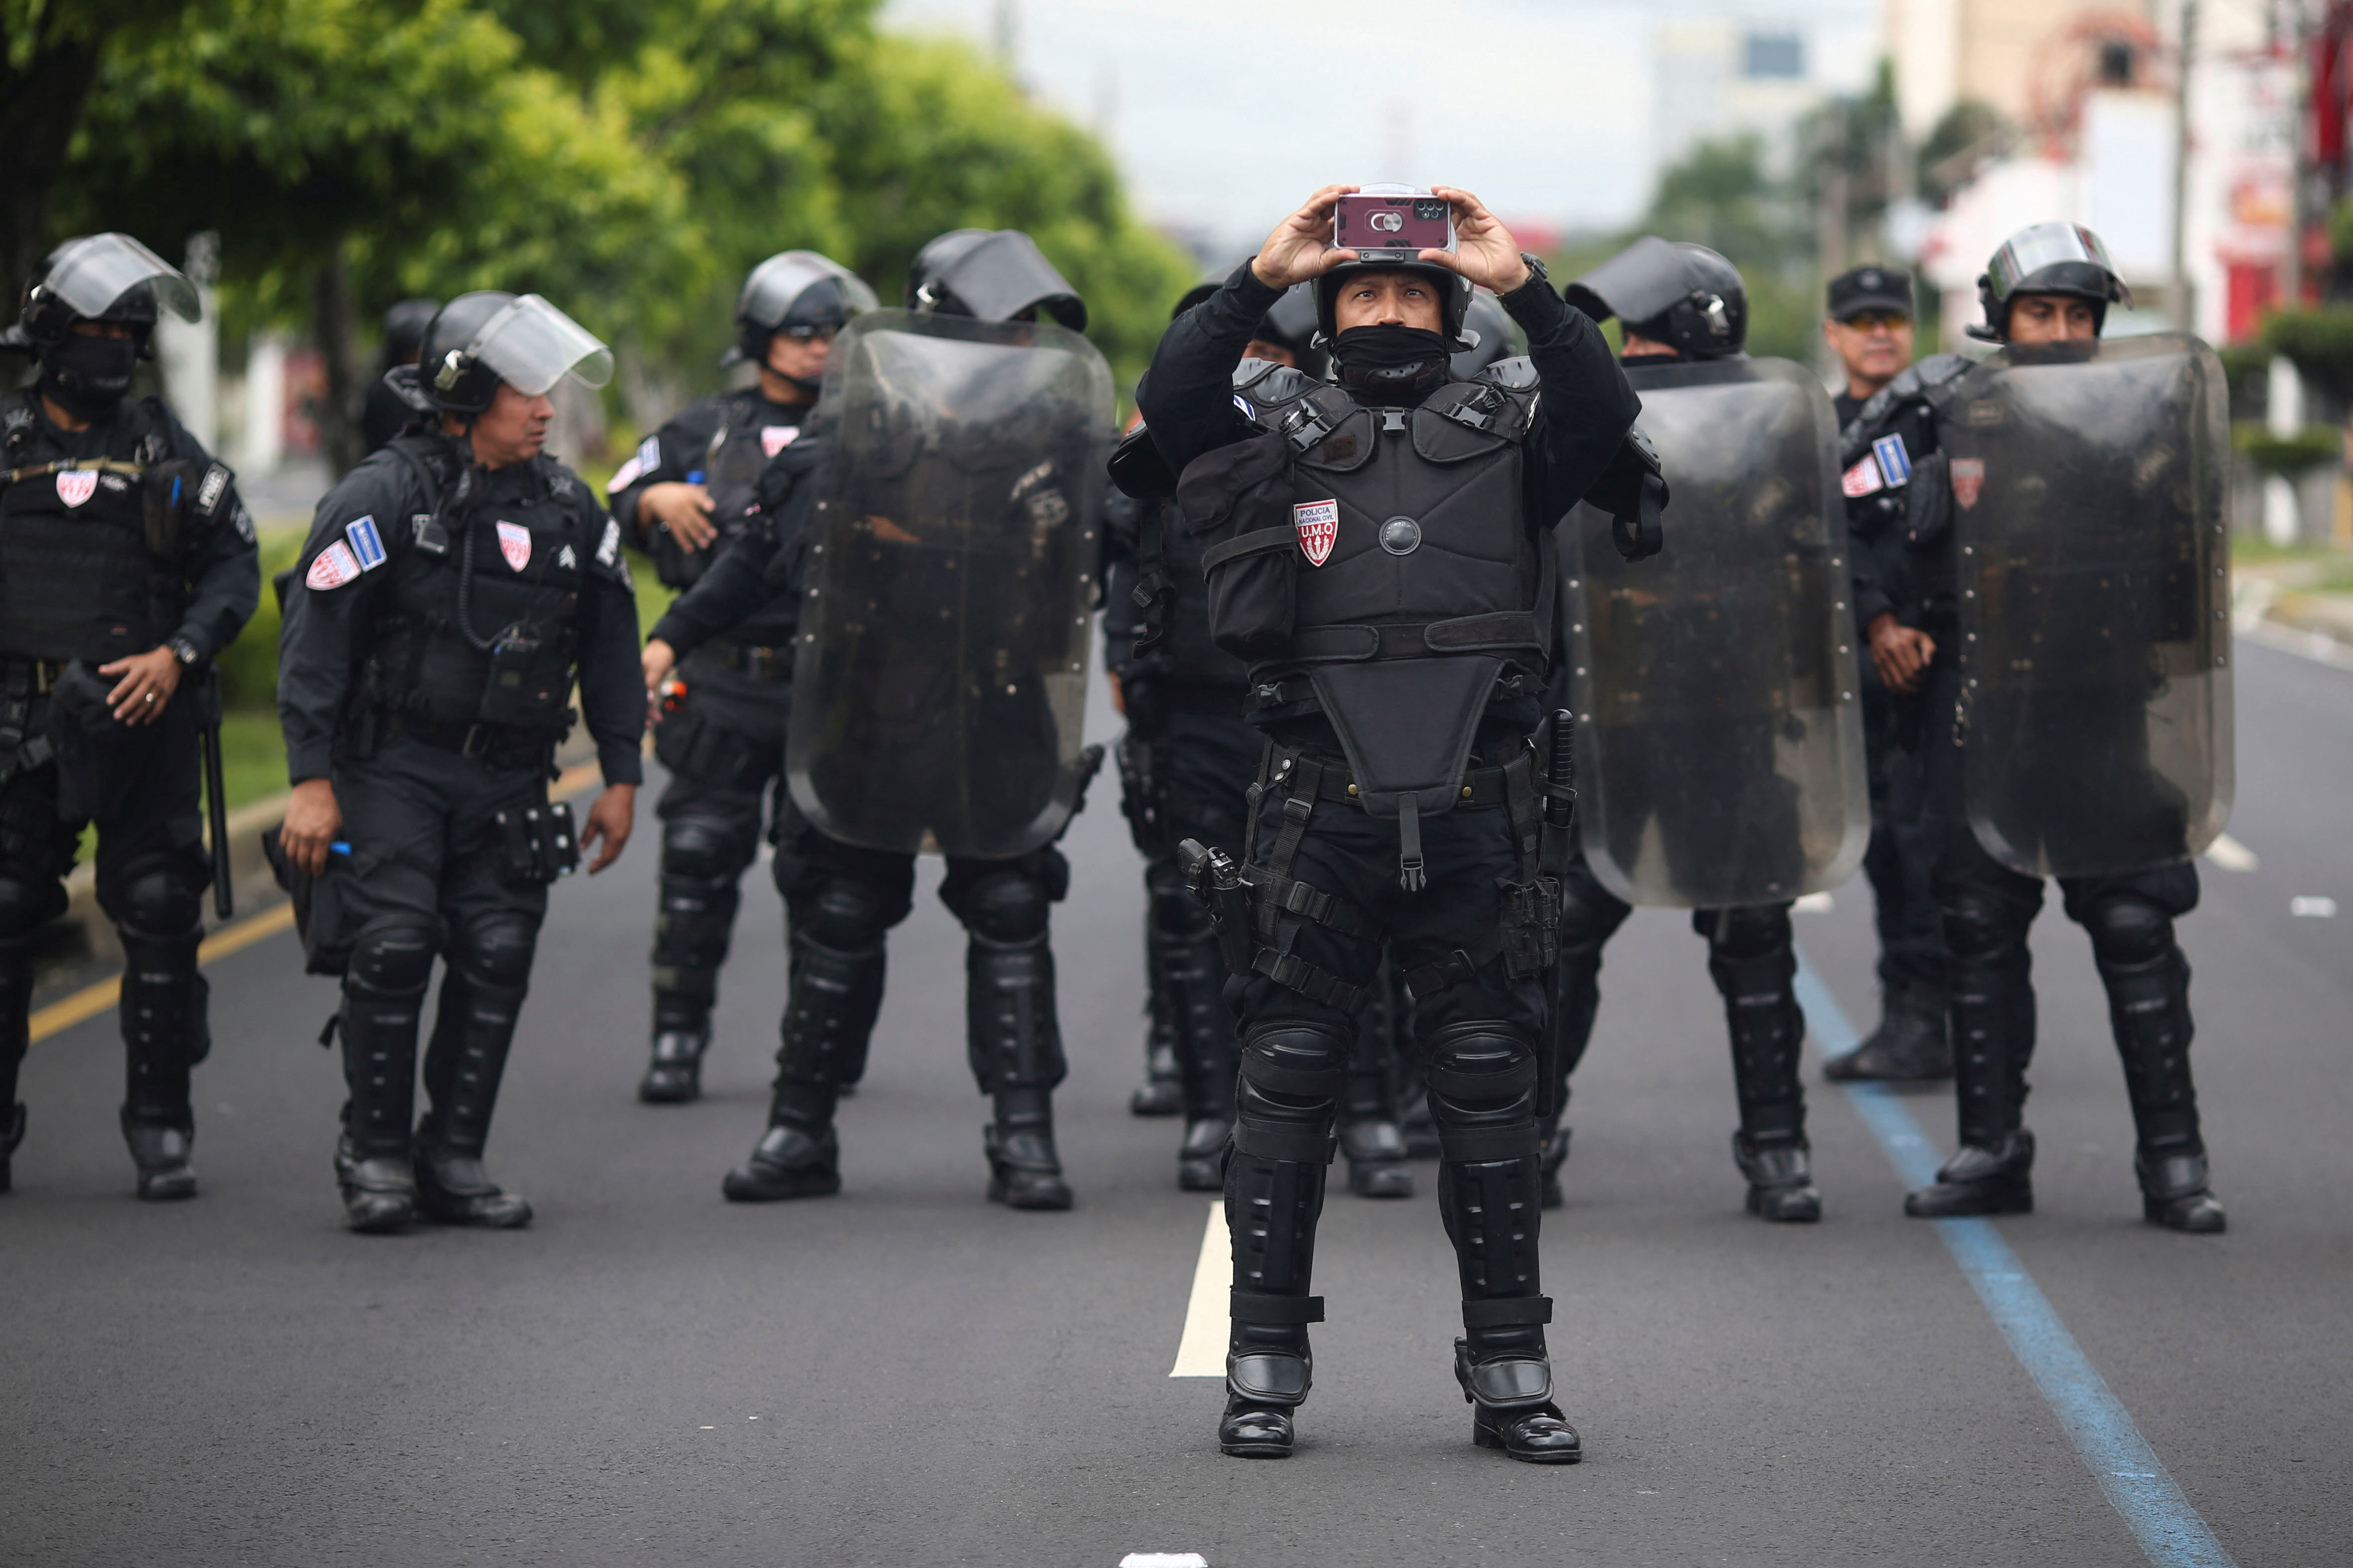 How El Salvador's State of Emergency Has Impacted the Crime Rate